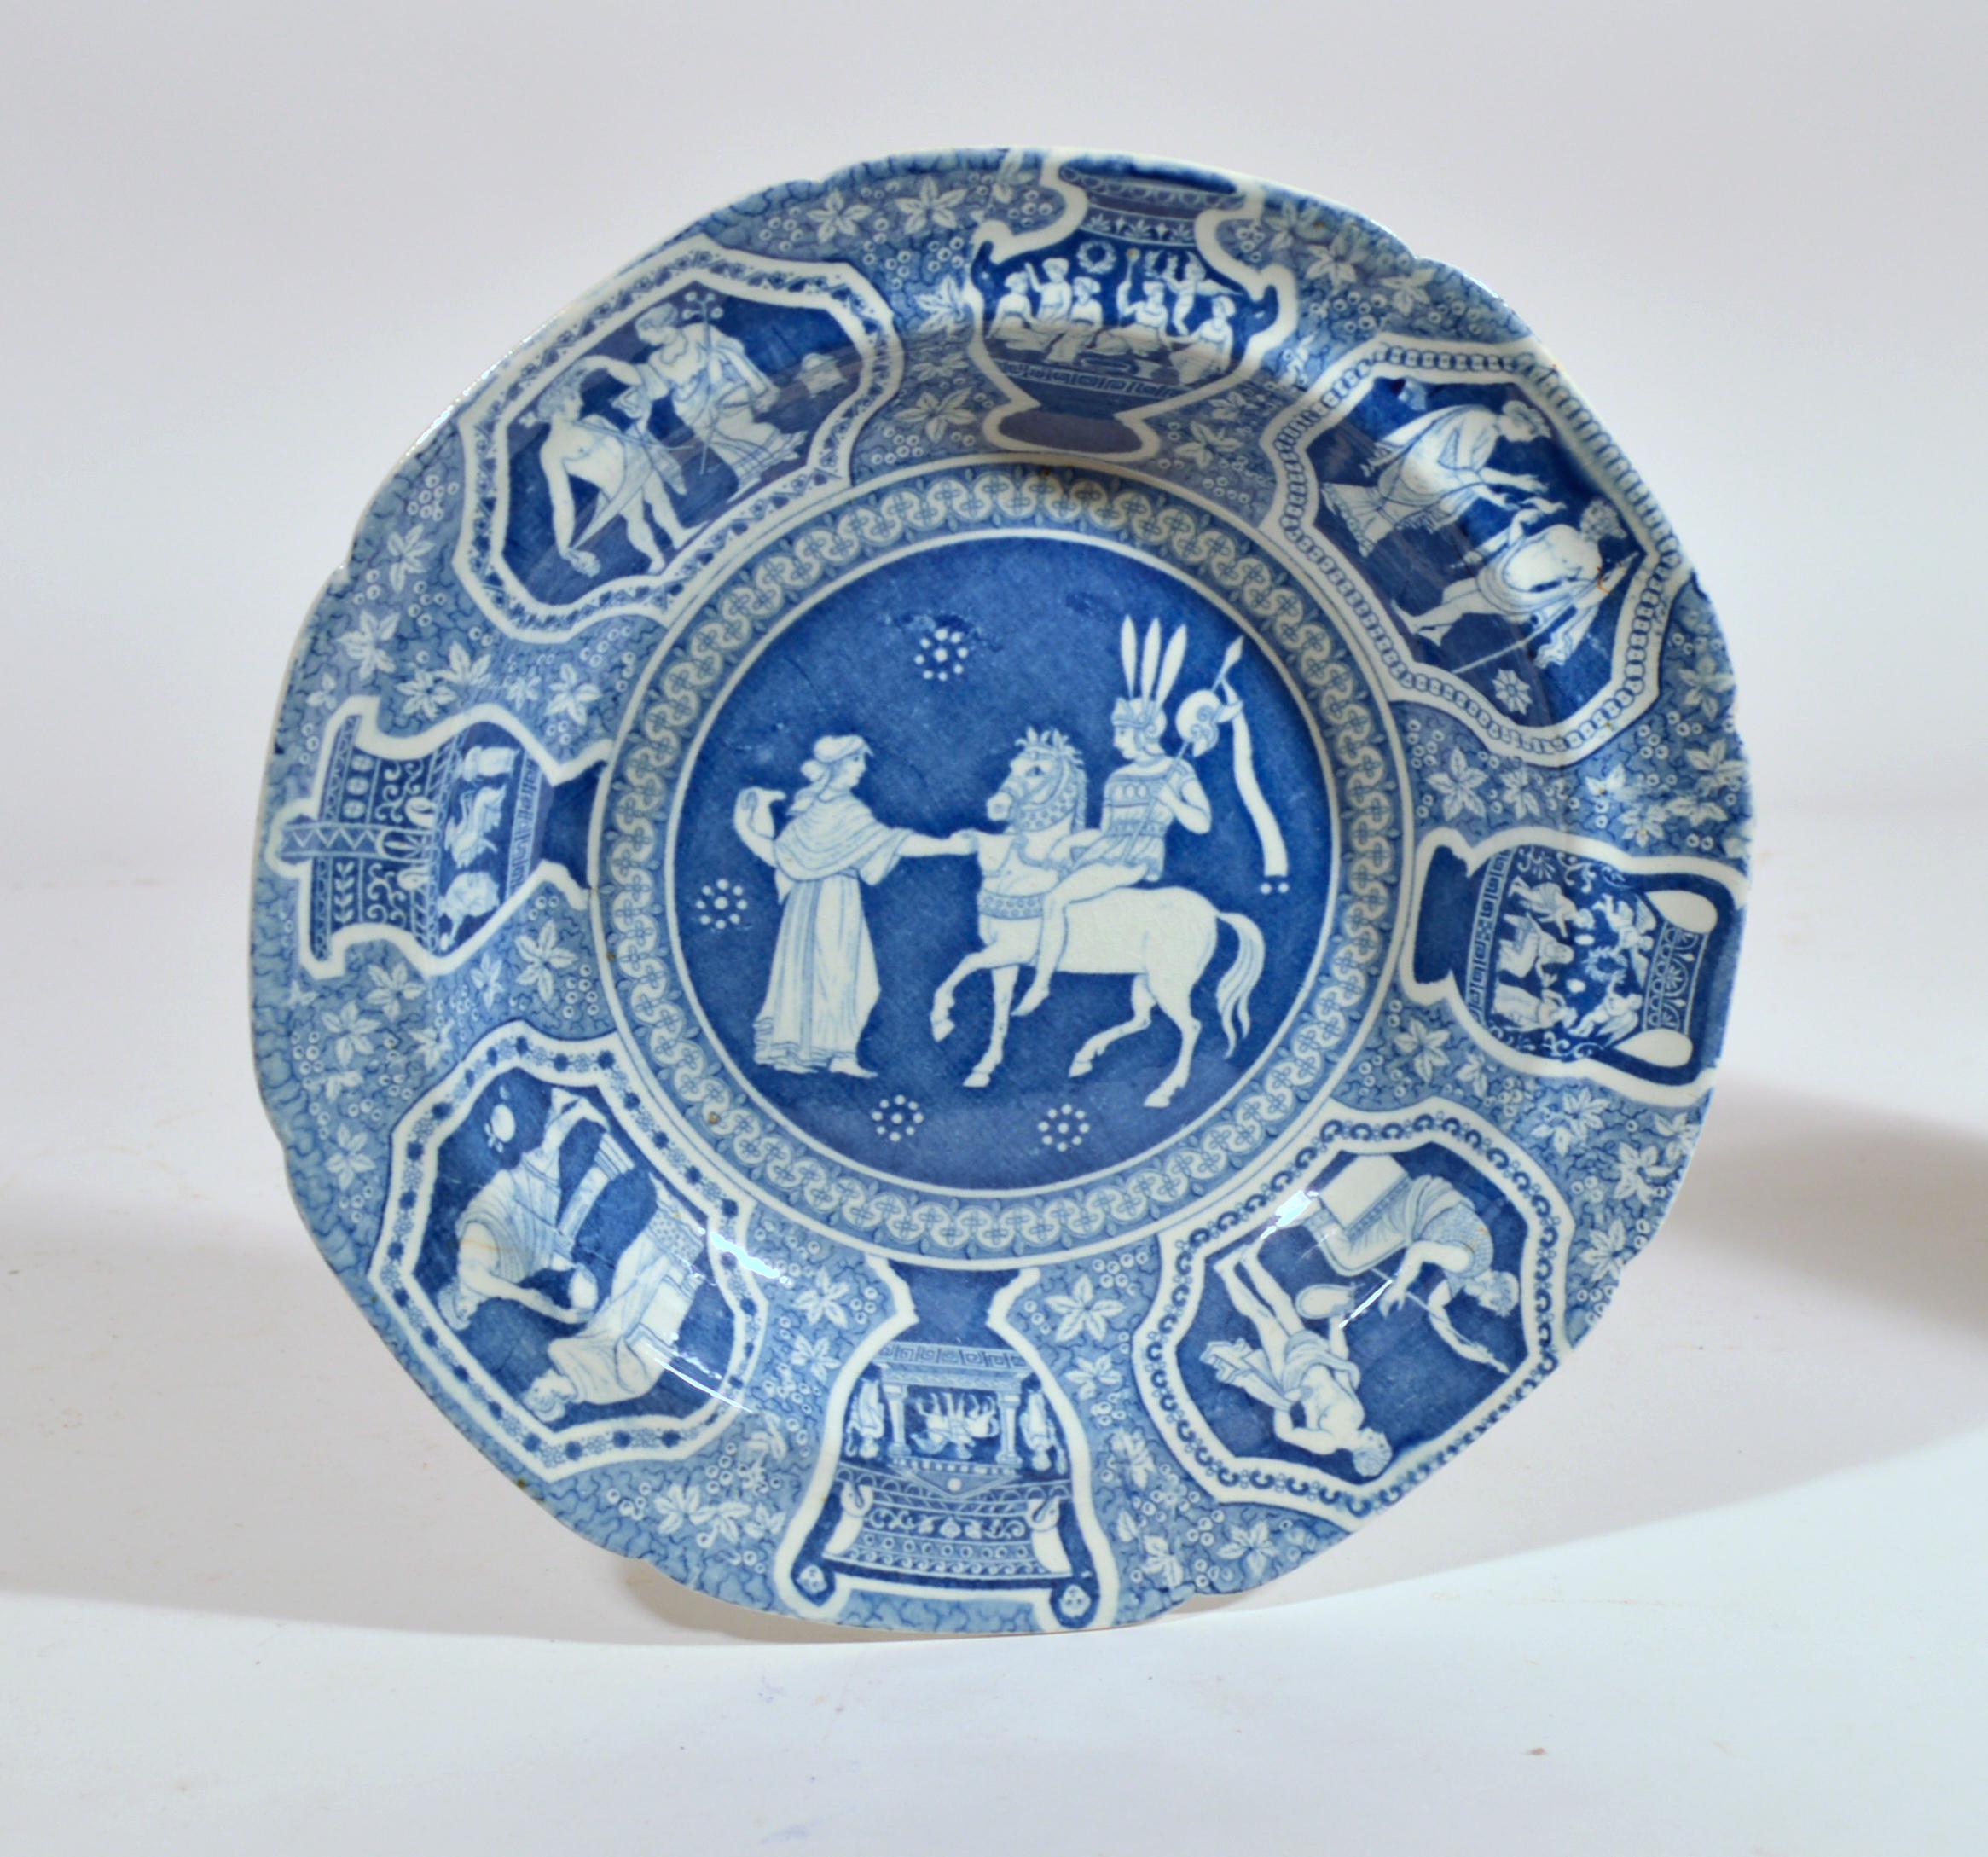 Spode Neo-classical Greek pattern blue soup plates,
Refreshment for Phliasian Horseman,
Set of twelve (12)
Early-19th century 

The Spode Greek pattern pottery plate is printed in blue with 